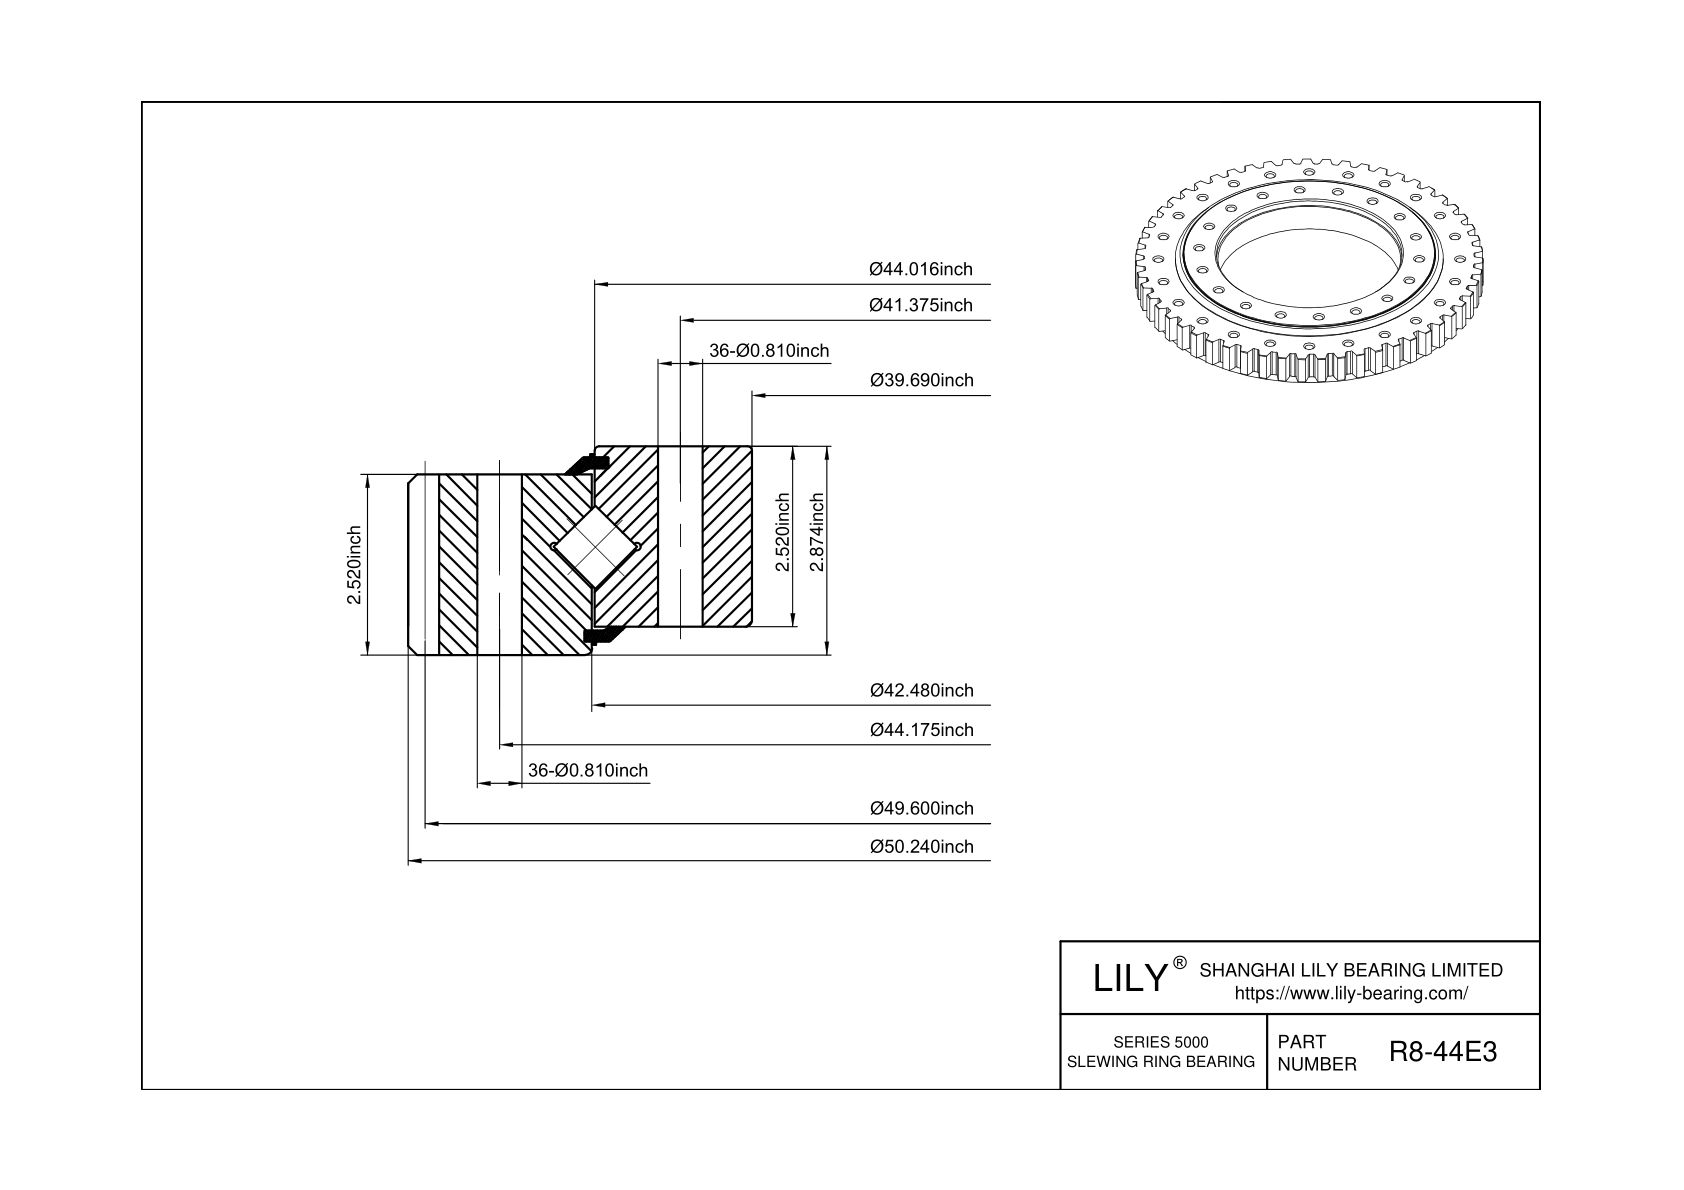 R8-44E3 Cross Roller Slewing Ring Bearing cad drawing